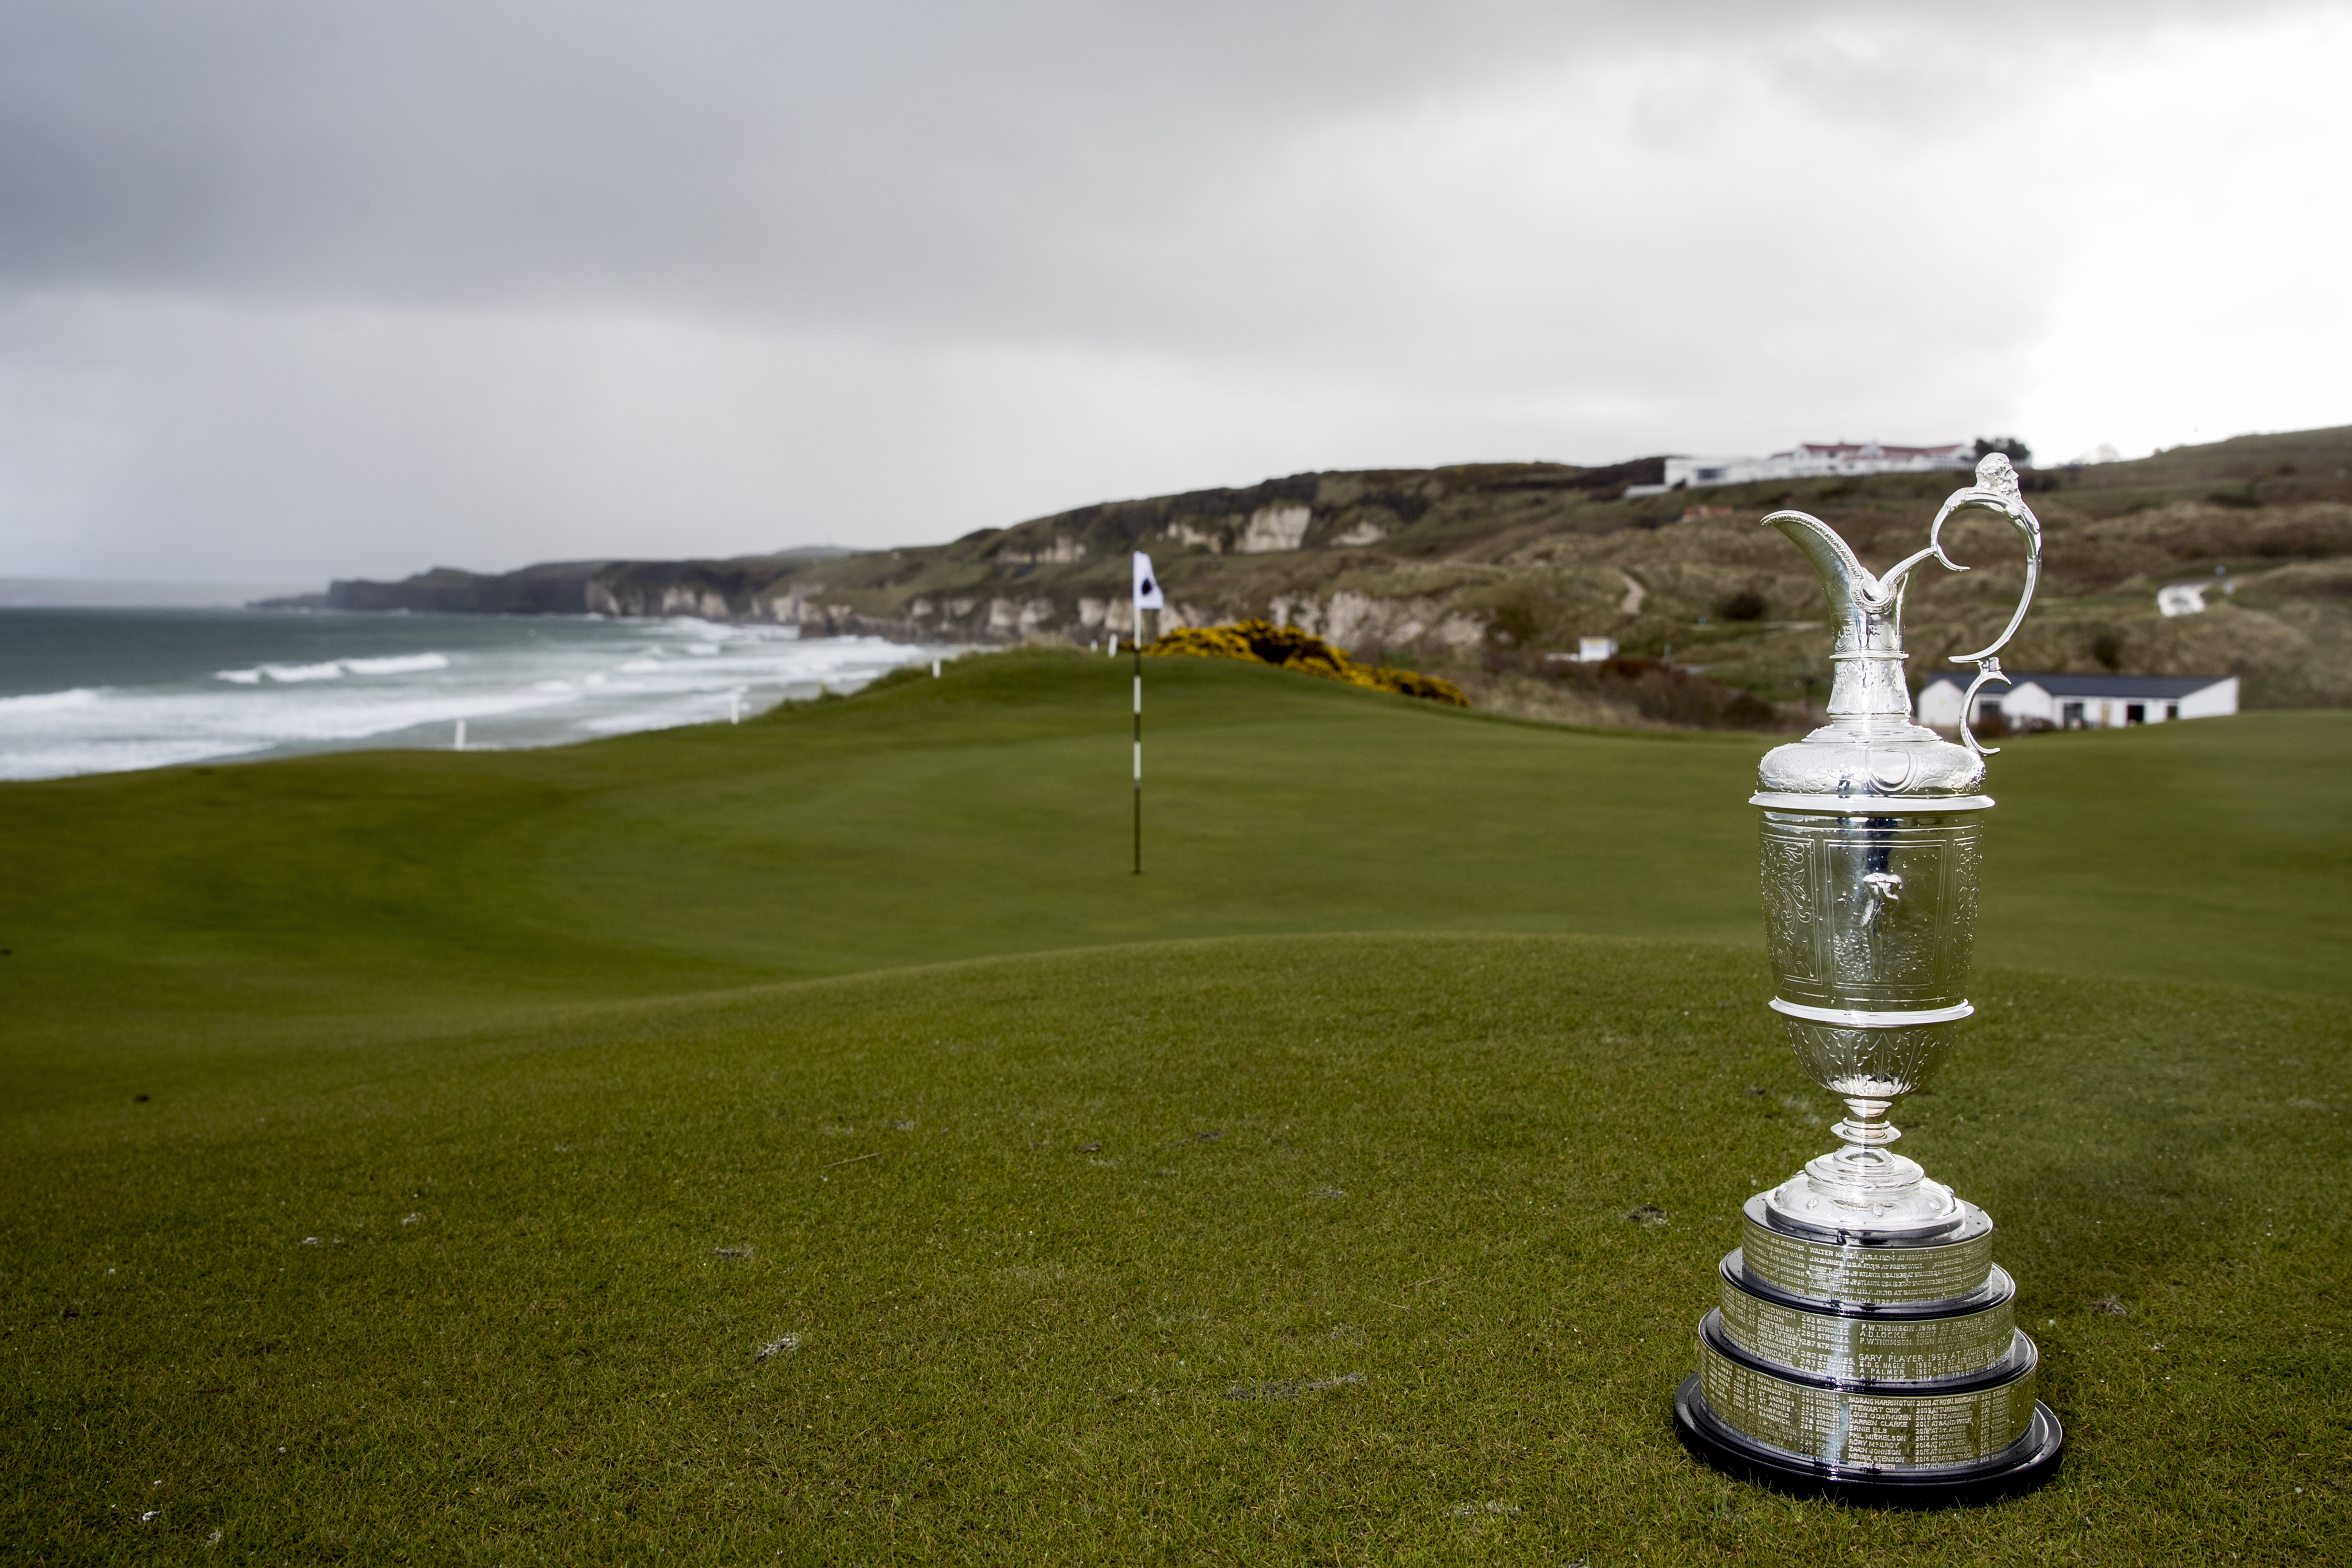 The Claret Jug during the media day at Royal Portrush Golf Club, Northern Ireland